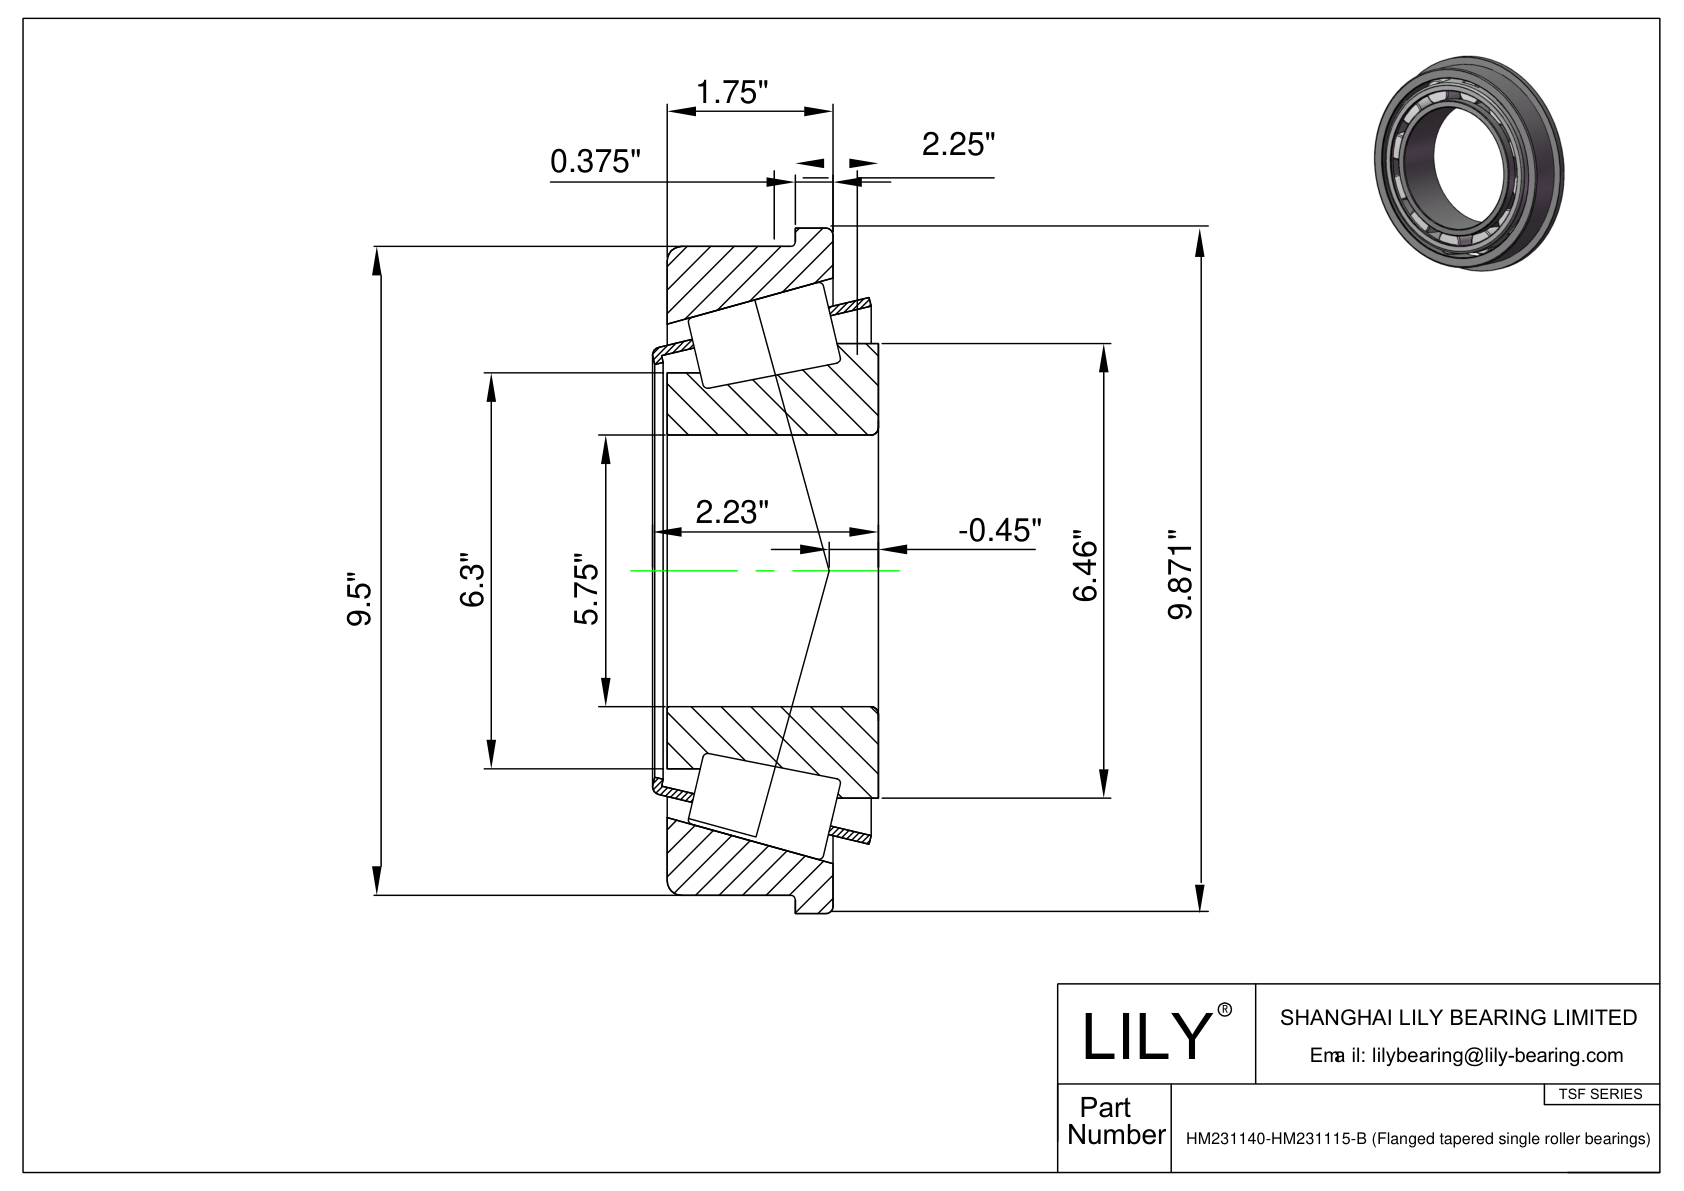 HM231140-HM231115-B TSF (Tapered Single Roller Bearings with Flange) (Imperial) cad drawing